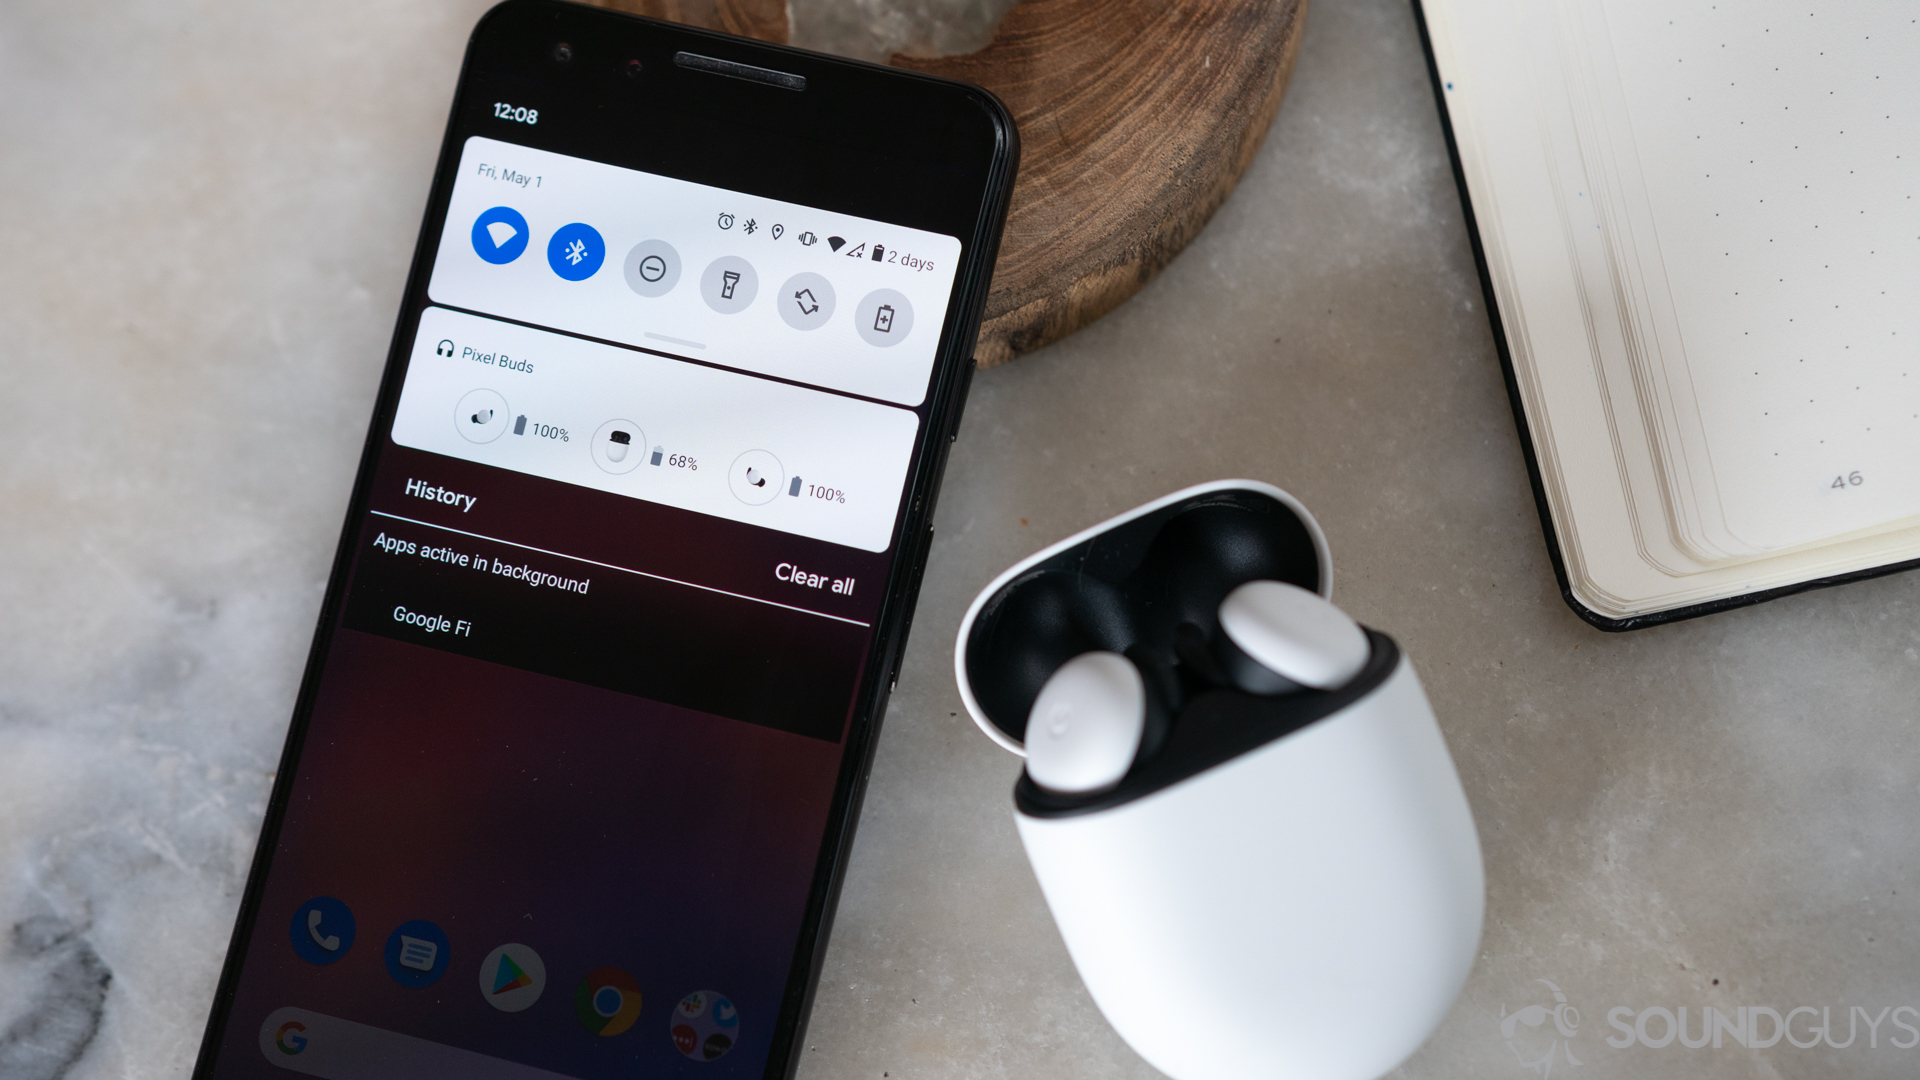 The Google Pixel Buds 2020 true wireless earbuds case is opened and next to the Pixel smartphone with the Bluetooth drop-down menu displayed.